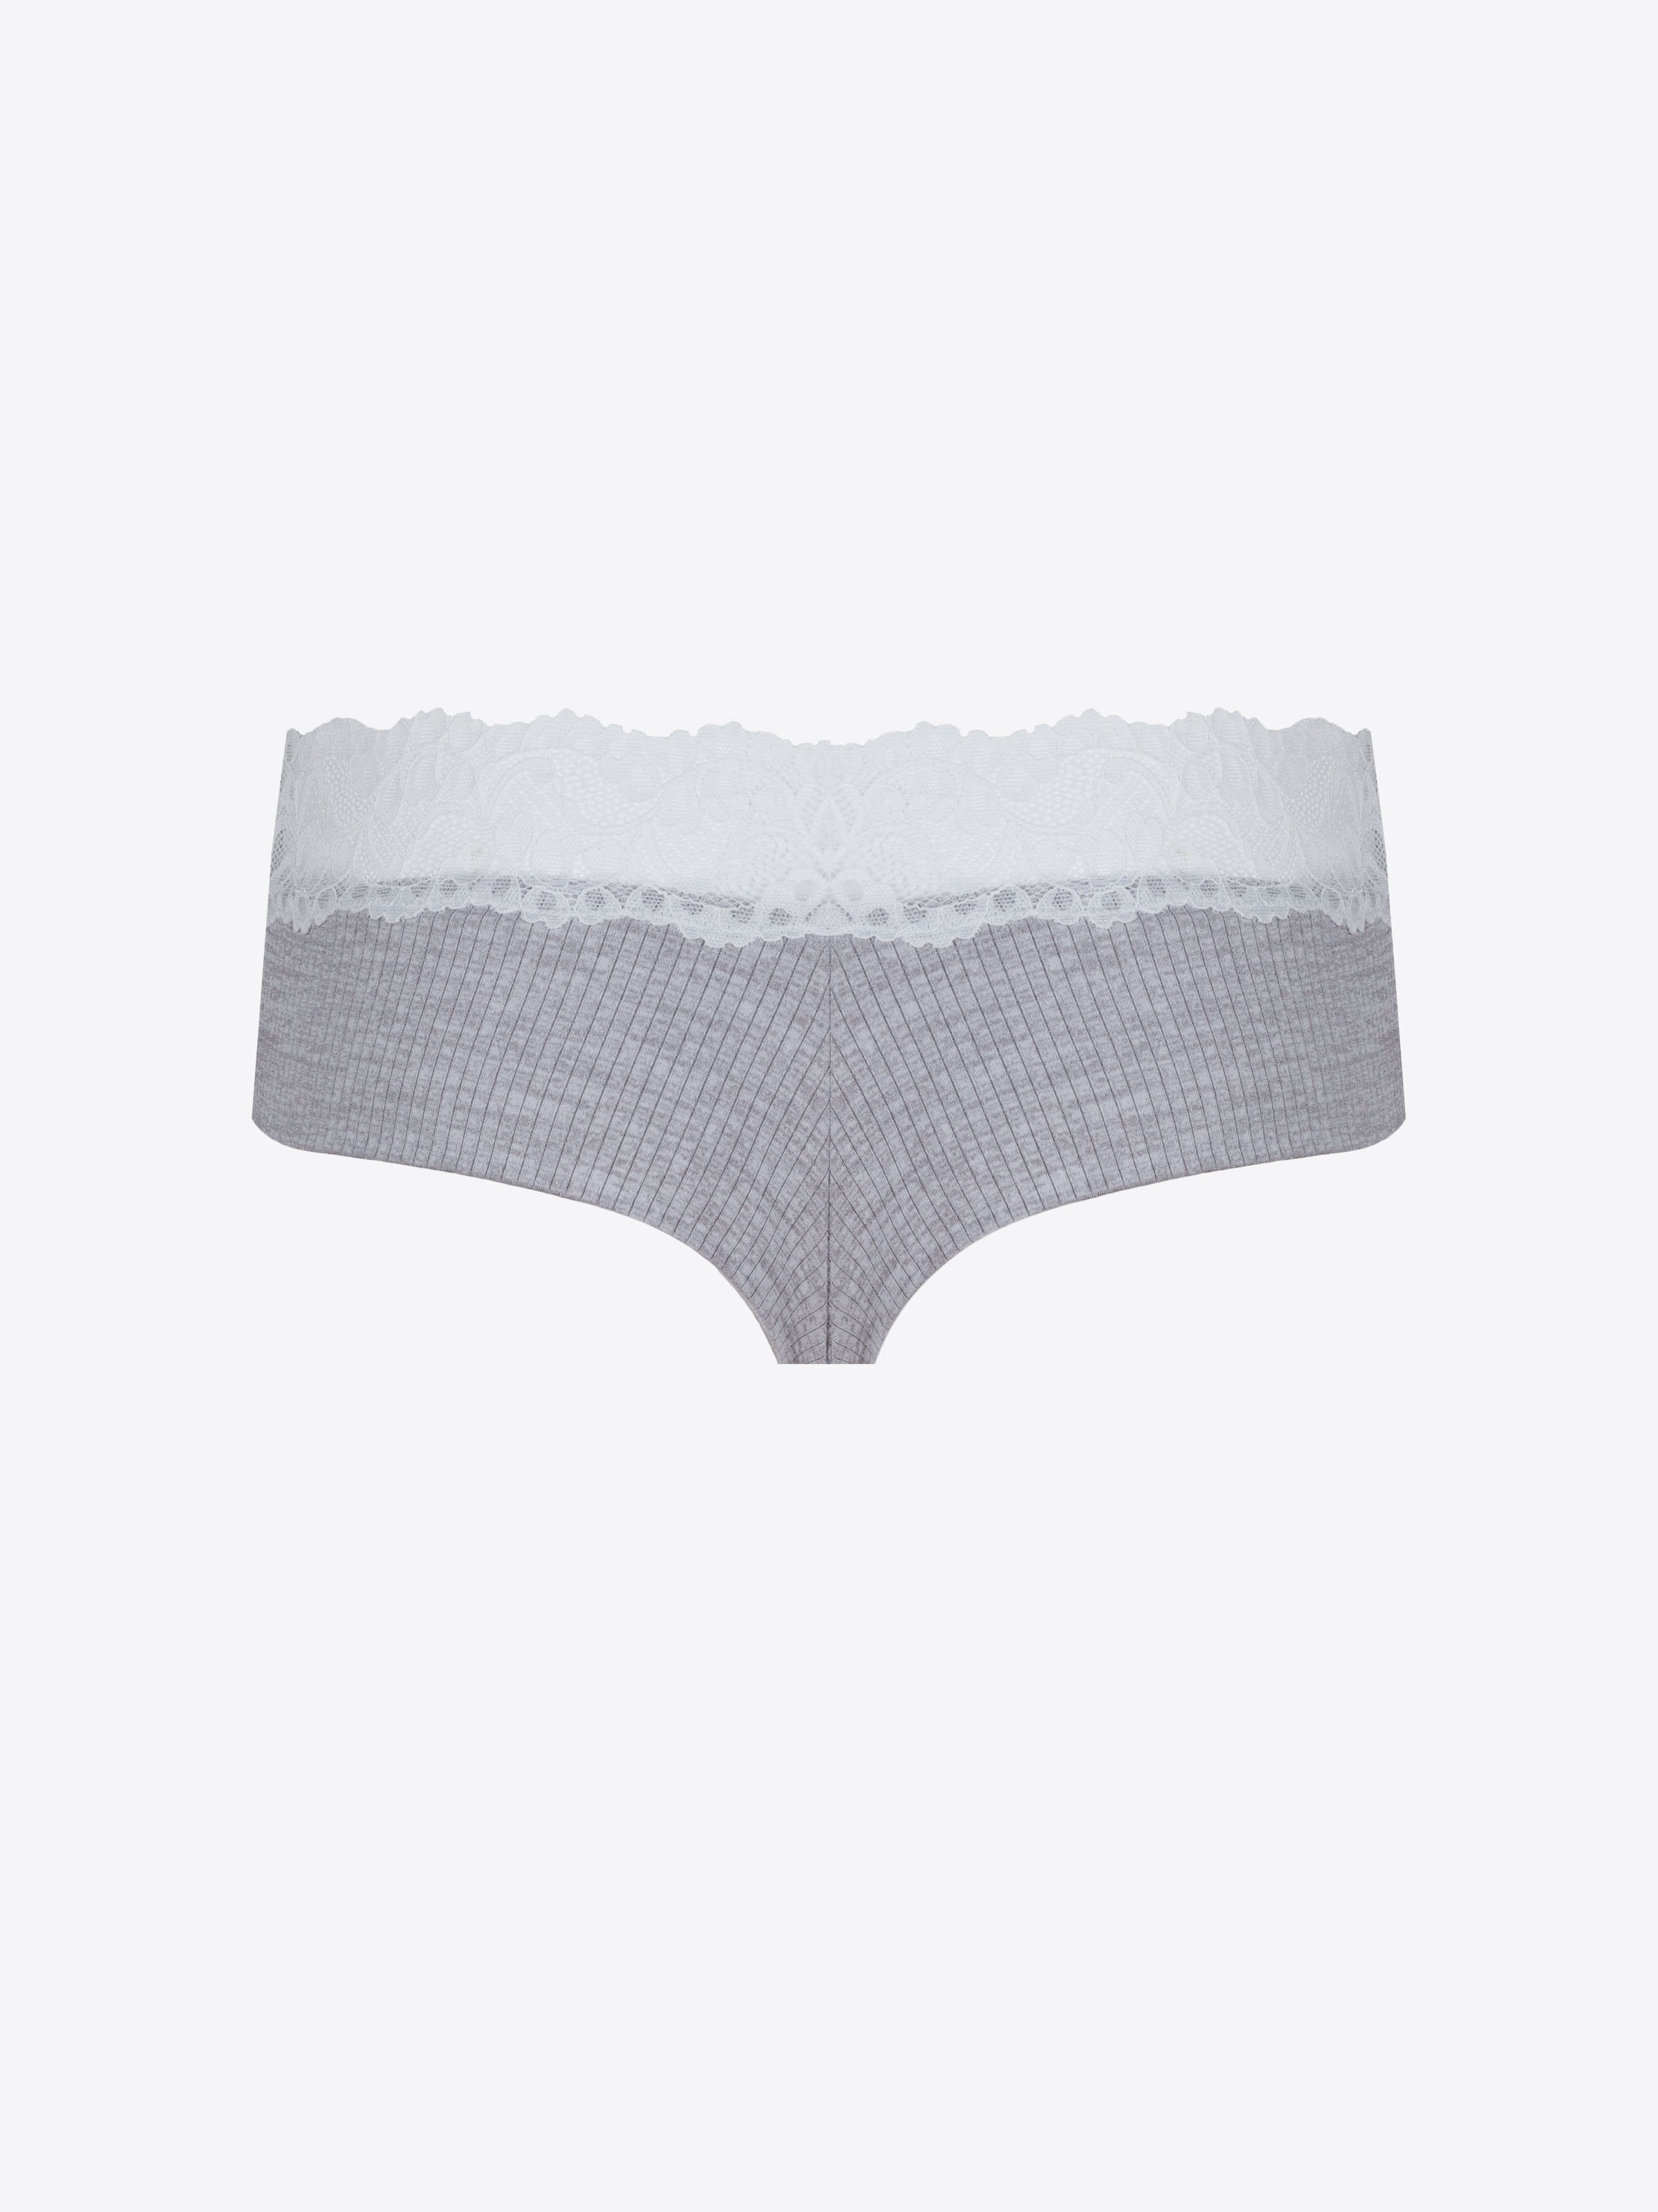 Clea Hipster Thong - LGM - CA$7.80 - CHANGE Lingerie